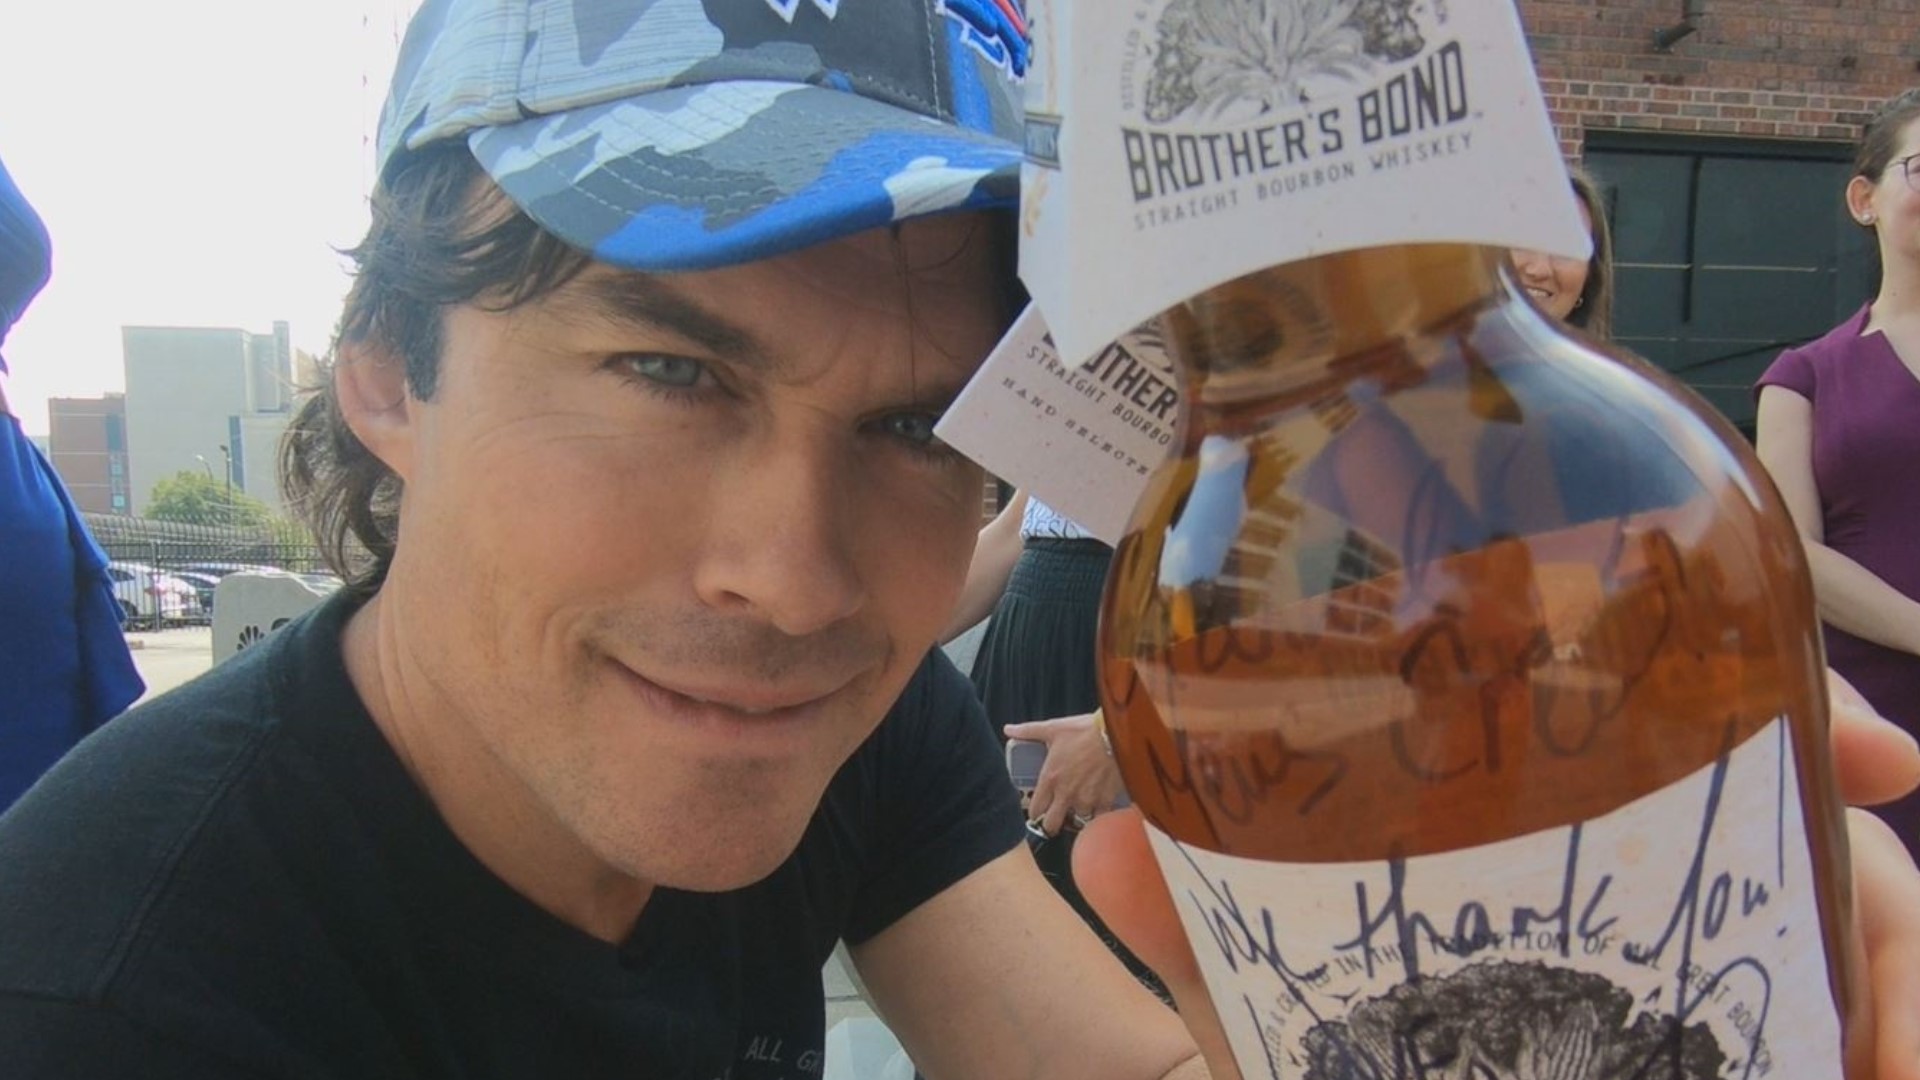 "The Vampire Diaries" star was in WNY to promote his bourbon, Brother's Bond, and spoke with Melissa Holmes. Here's the extended interview.